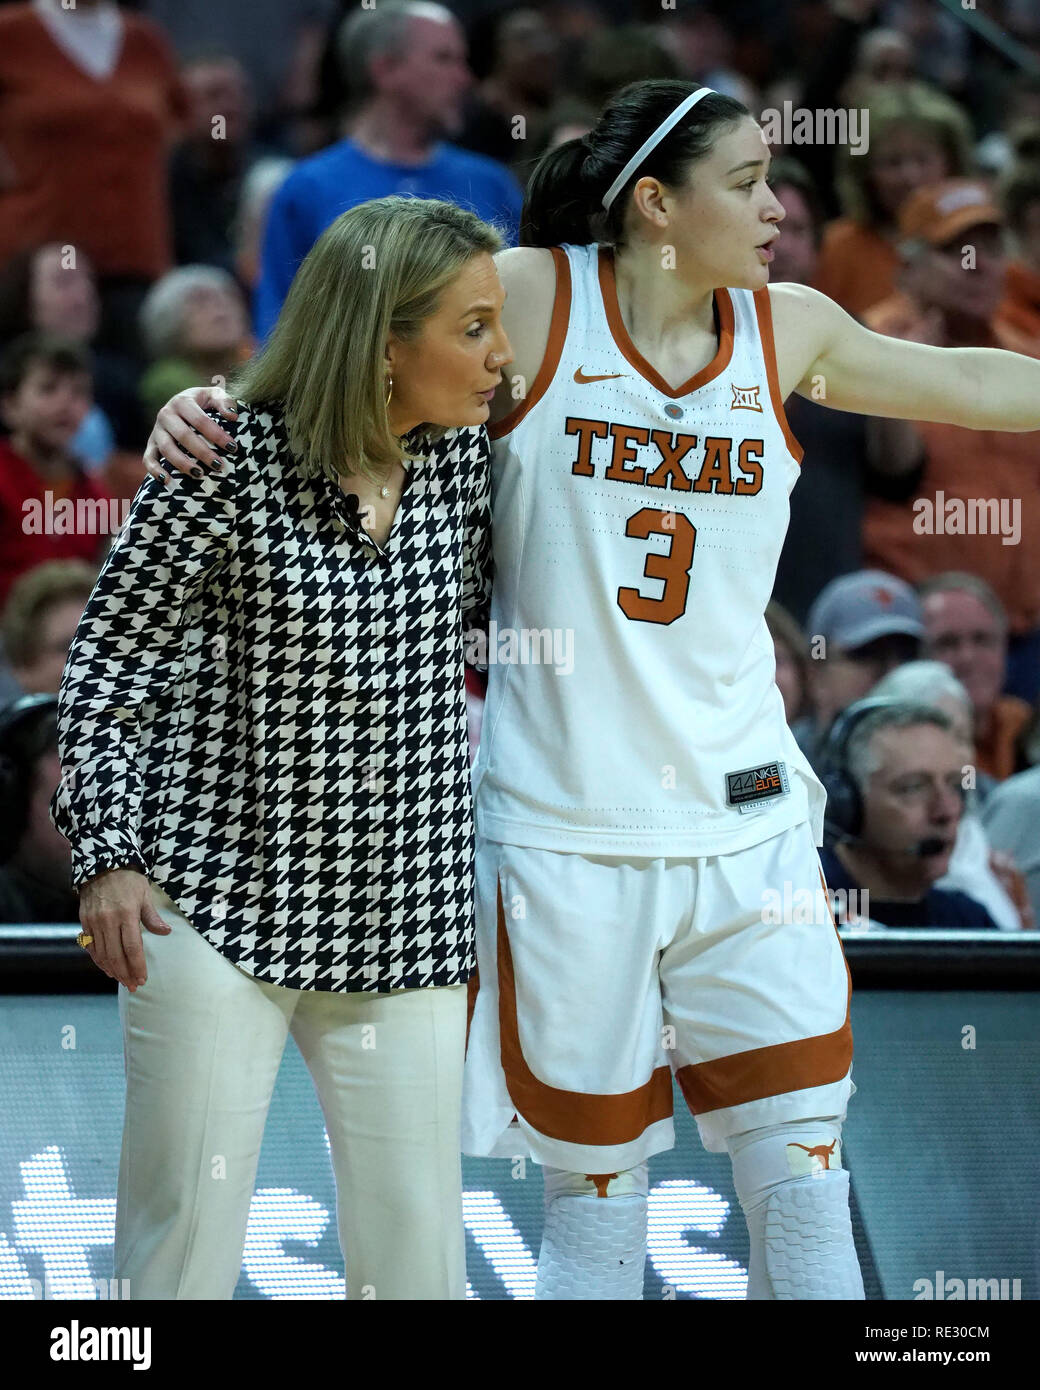 Jan 19, 2019. Head coach Karen Aston and Danni Williams #3 of the Texas Longhorns in action vs the TCU Horned Frogs at the Frank Erwin Center in Austin Texas.Robert Backman/Cal Sport Media. Stock Photo